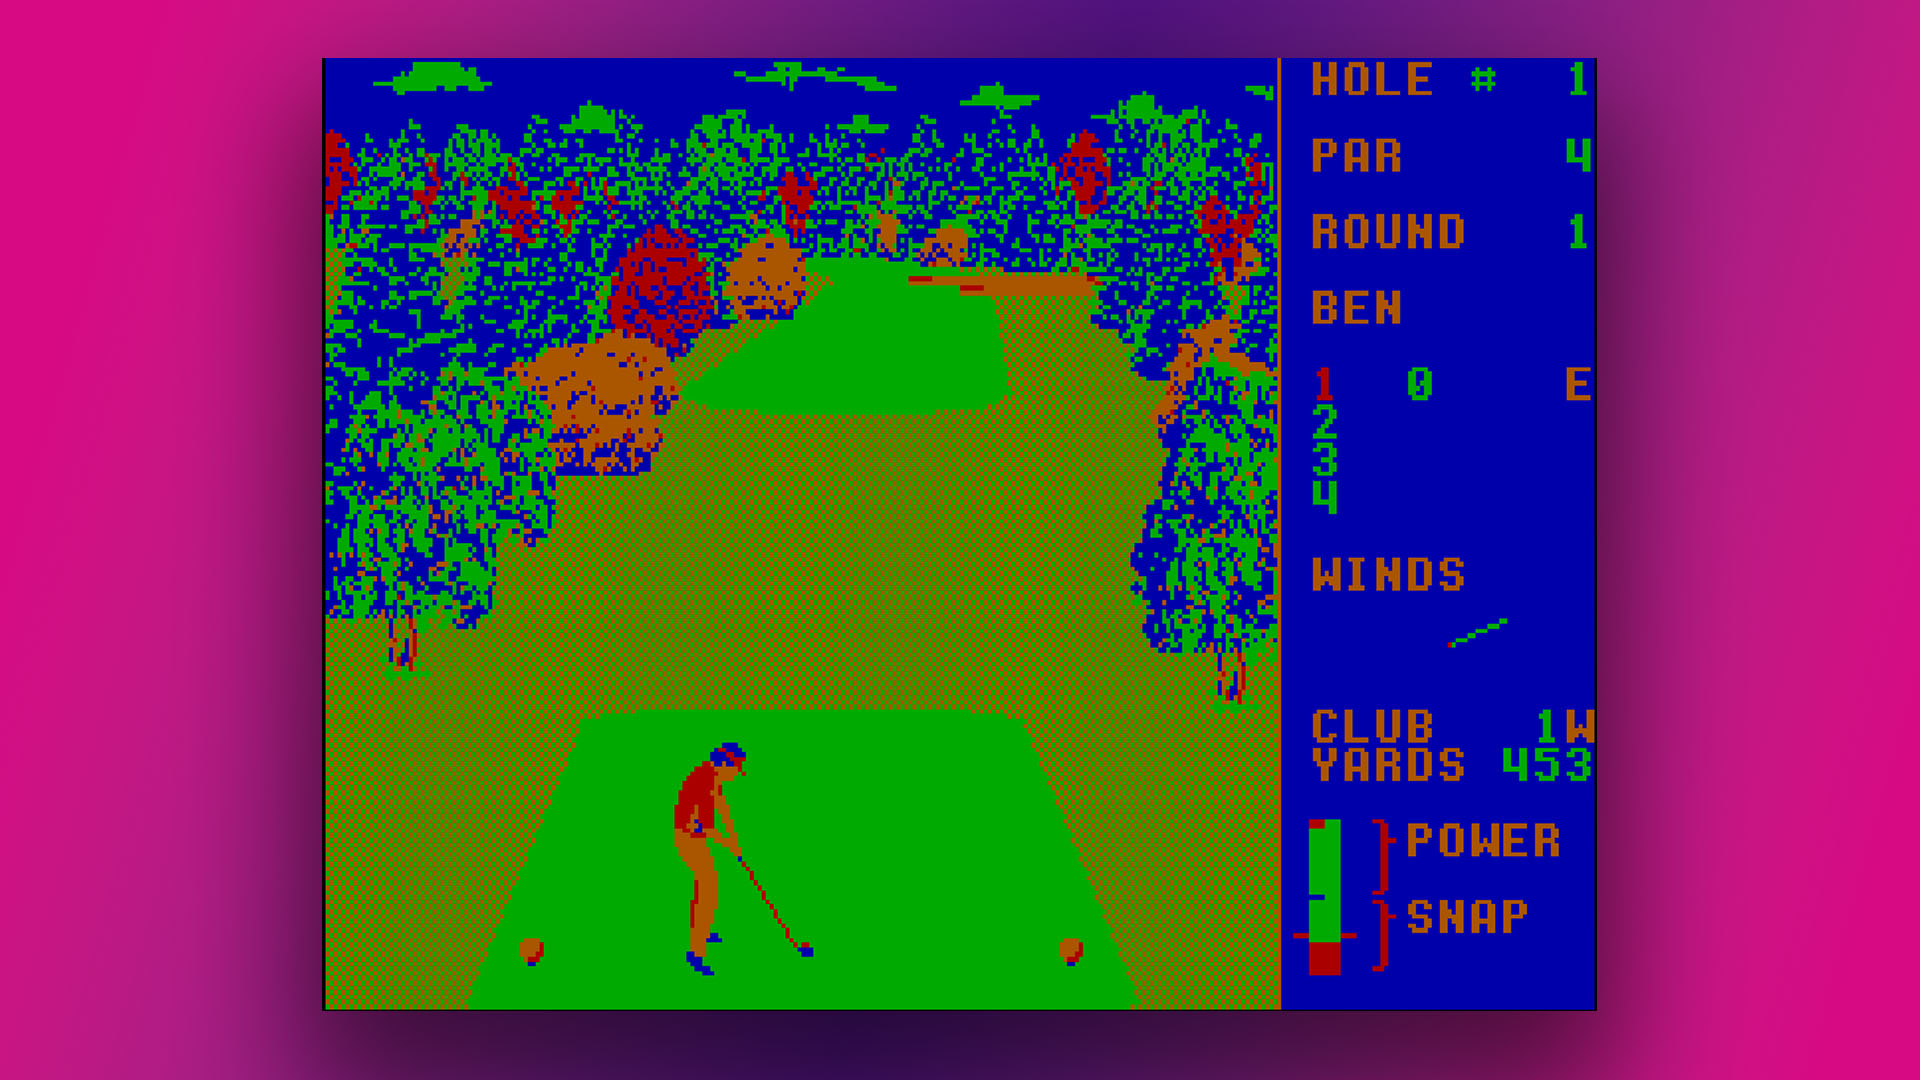 CGA graphics: World Class Leaderboard golf game - BIOS mode 4, palette 0, low intensity, black background replaced with blue